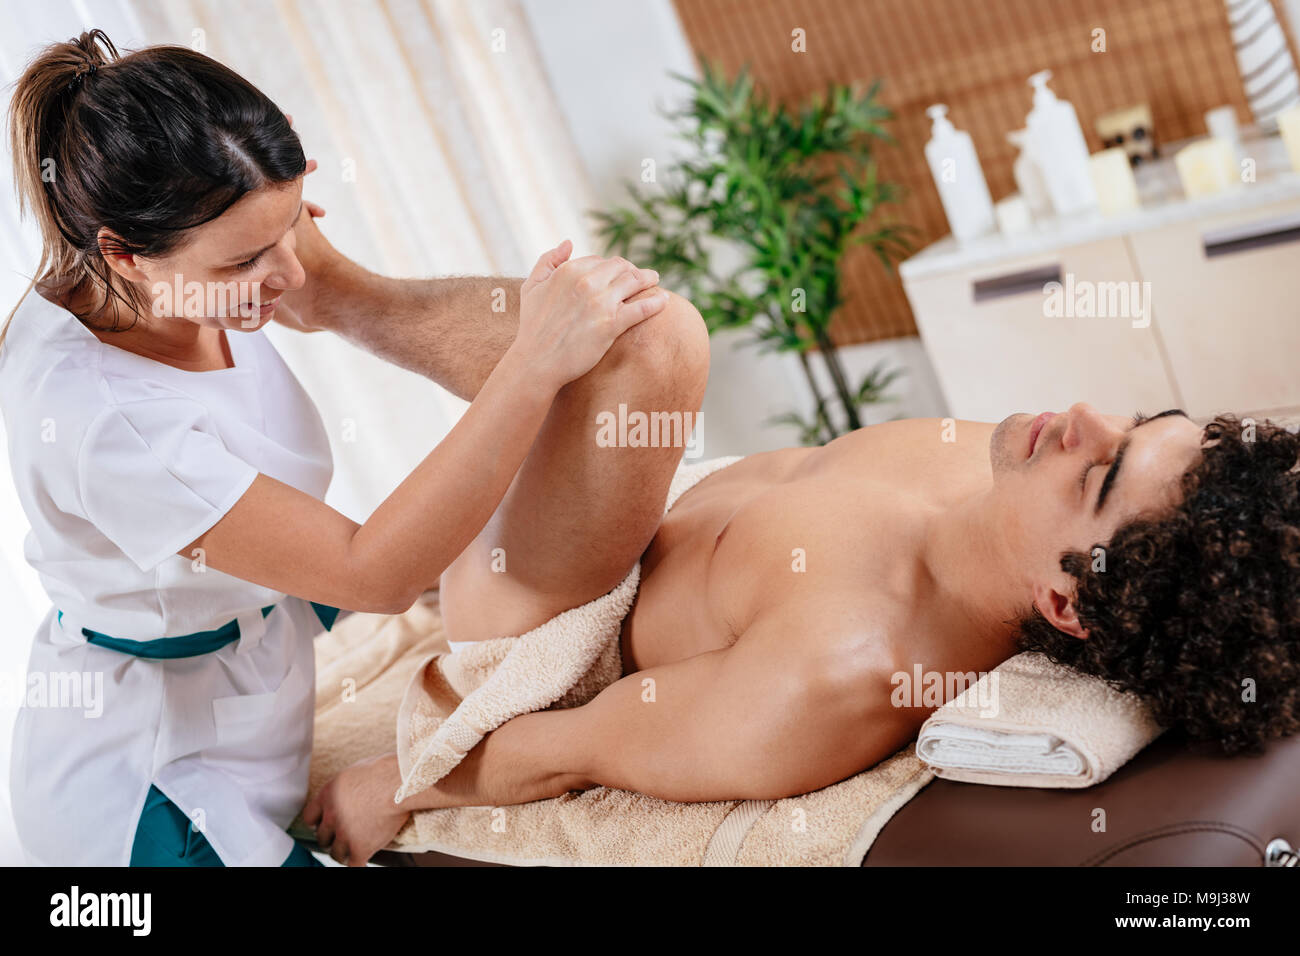 Handsome man lying down on his back, getting healthy leg massage by young female therapist, in spa center. Stock Photo